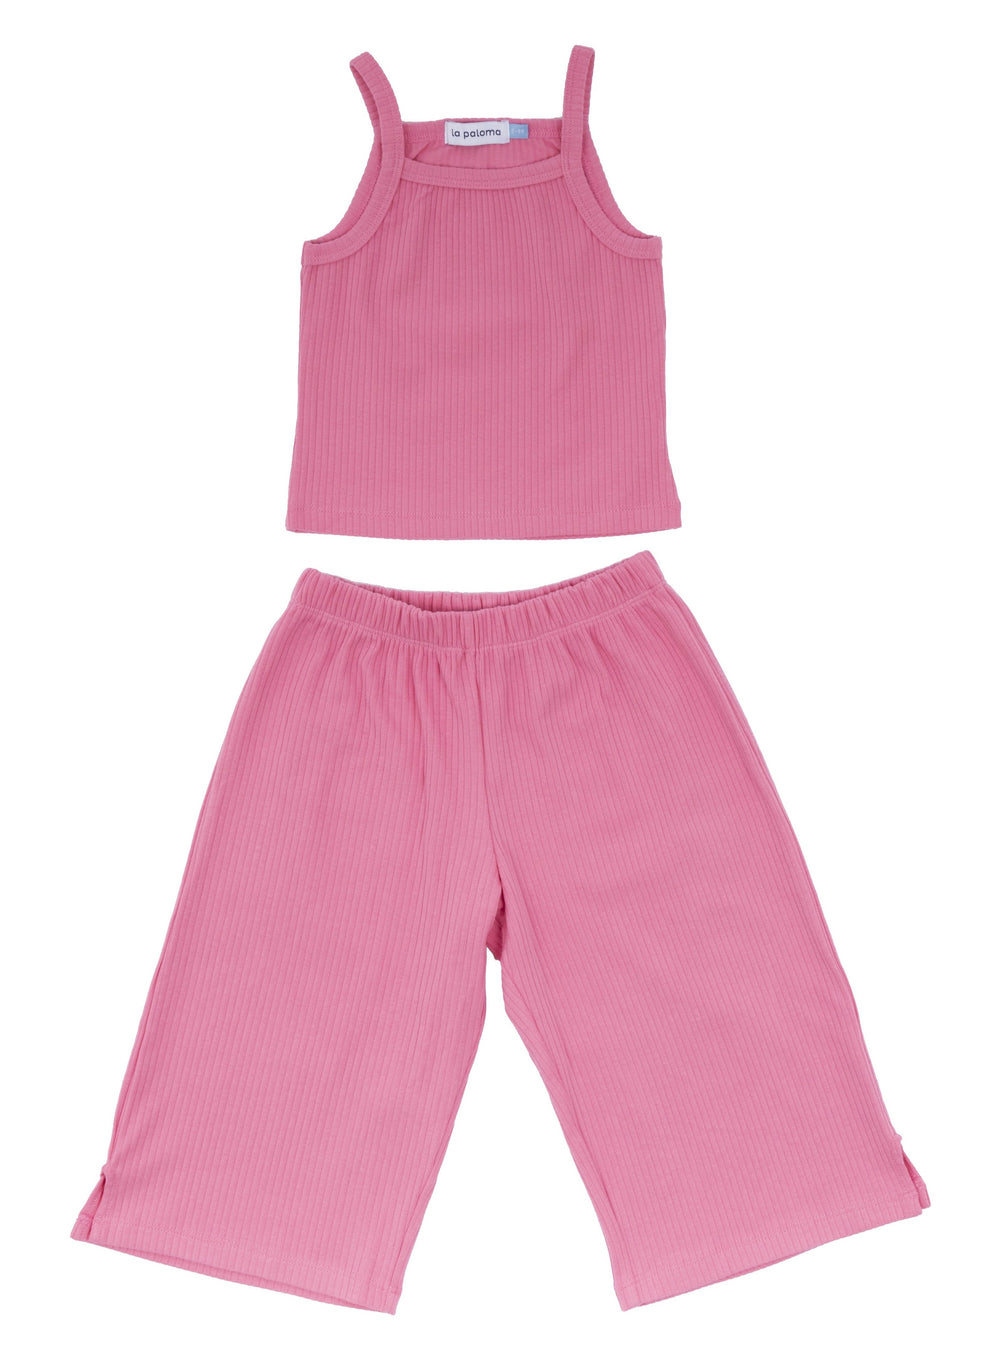 Girl's Ribbed Knit Cotton Set in Bubblegum